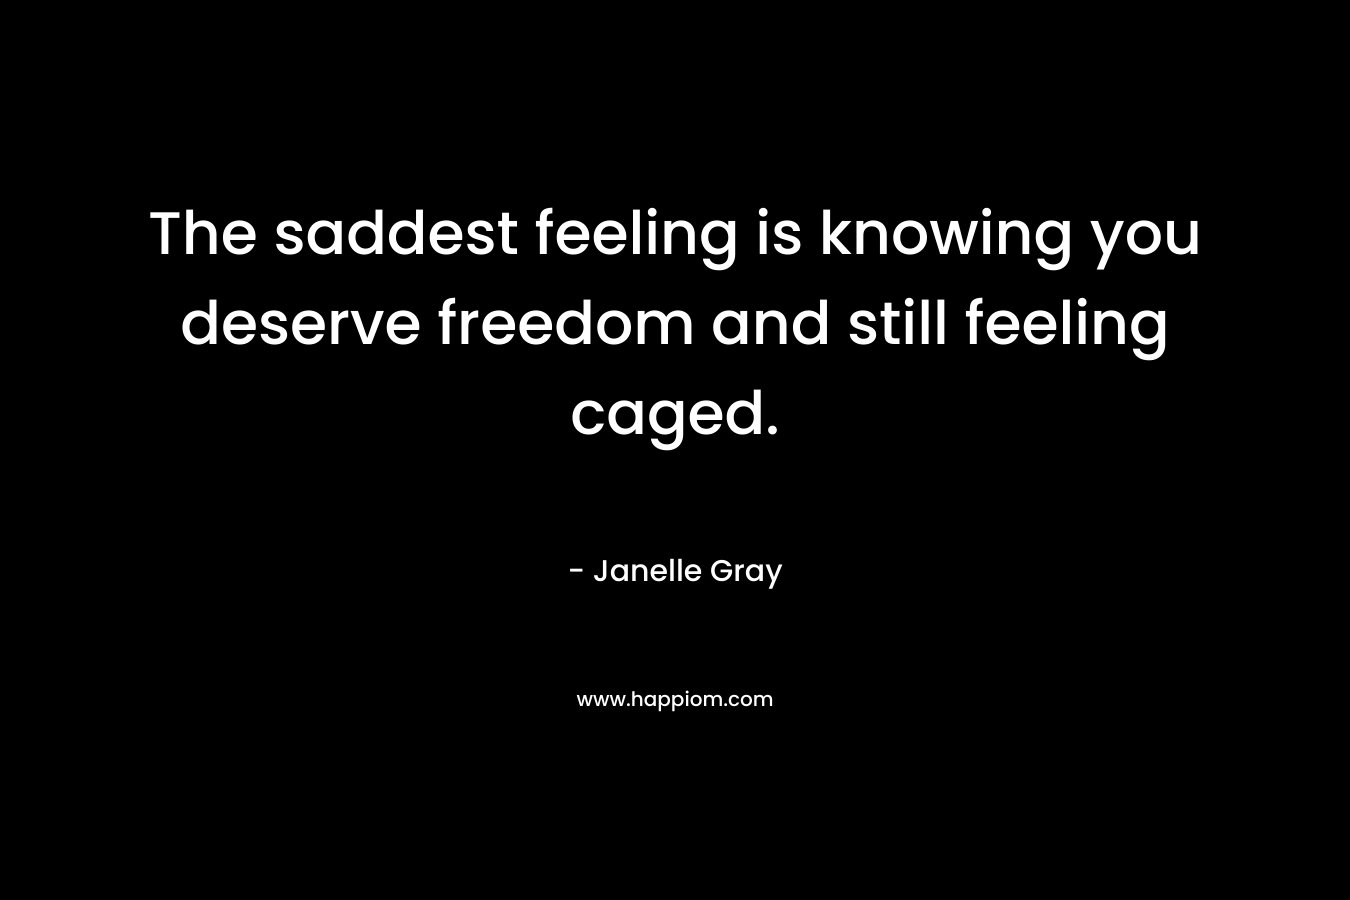 The saddest feeling is knowing you deserve freedom and still feeling caged. – Janelle Gray